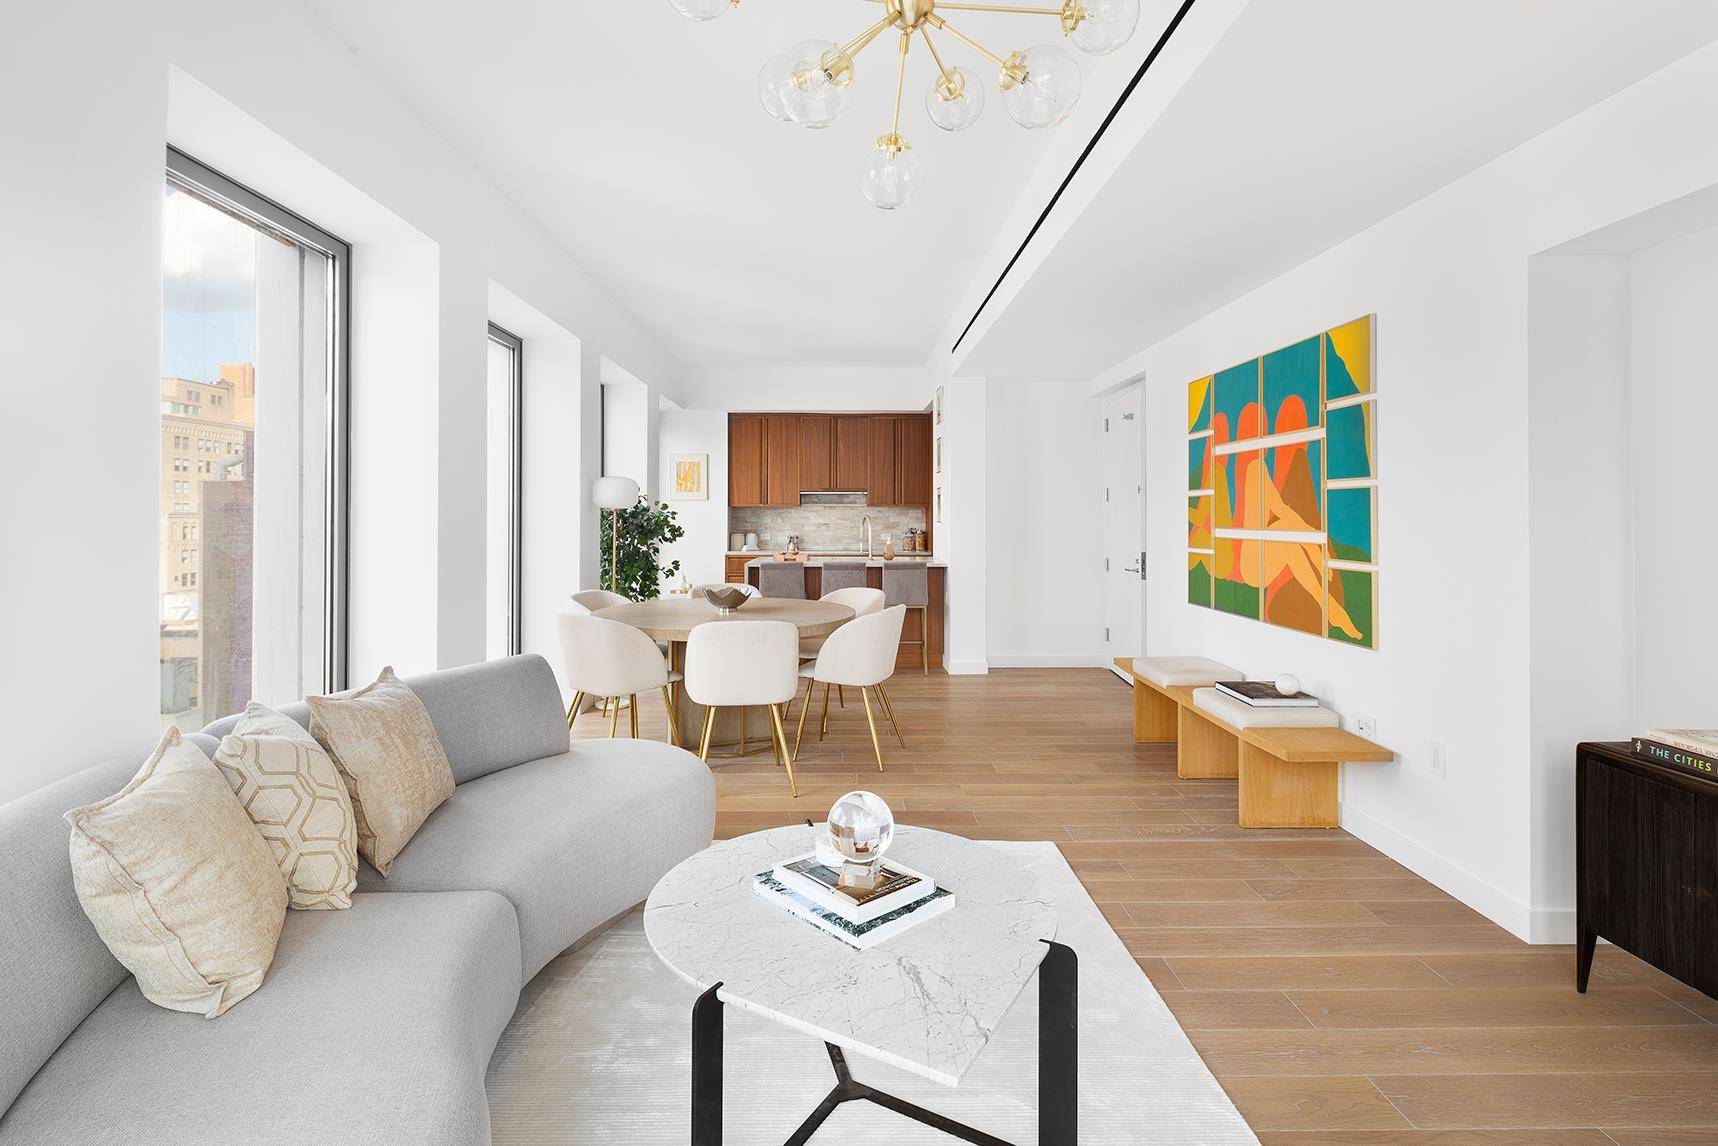 Welcome to the Neo Gothic splendor that is 30 East 31 in the historic and trendy NoMad North of Madison Square Park, an area characterized by varied architectural styles, from ...